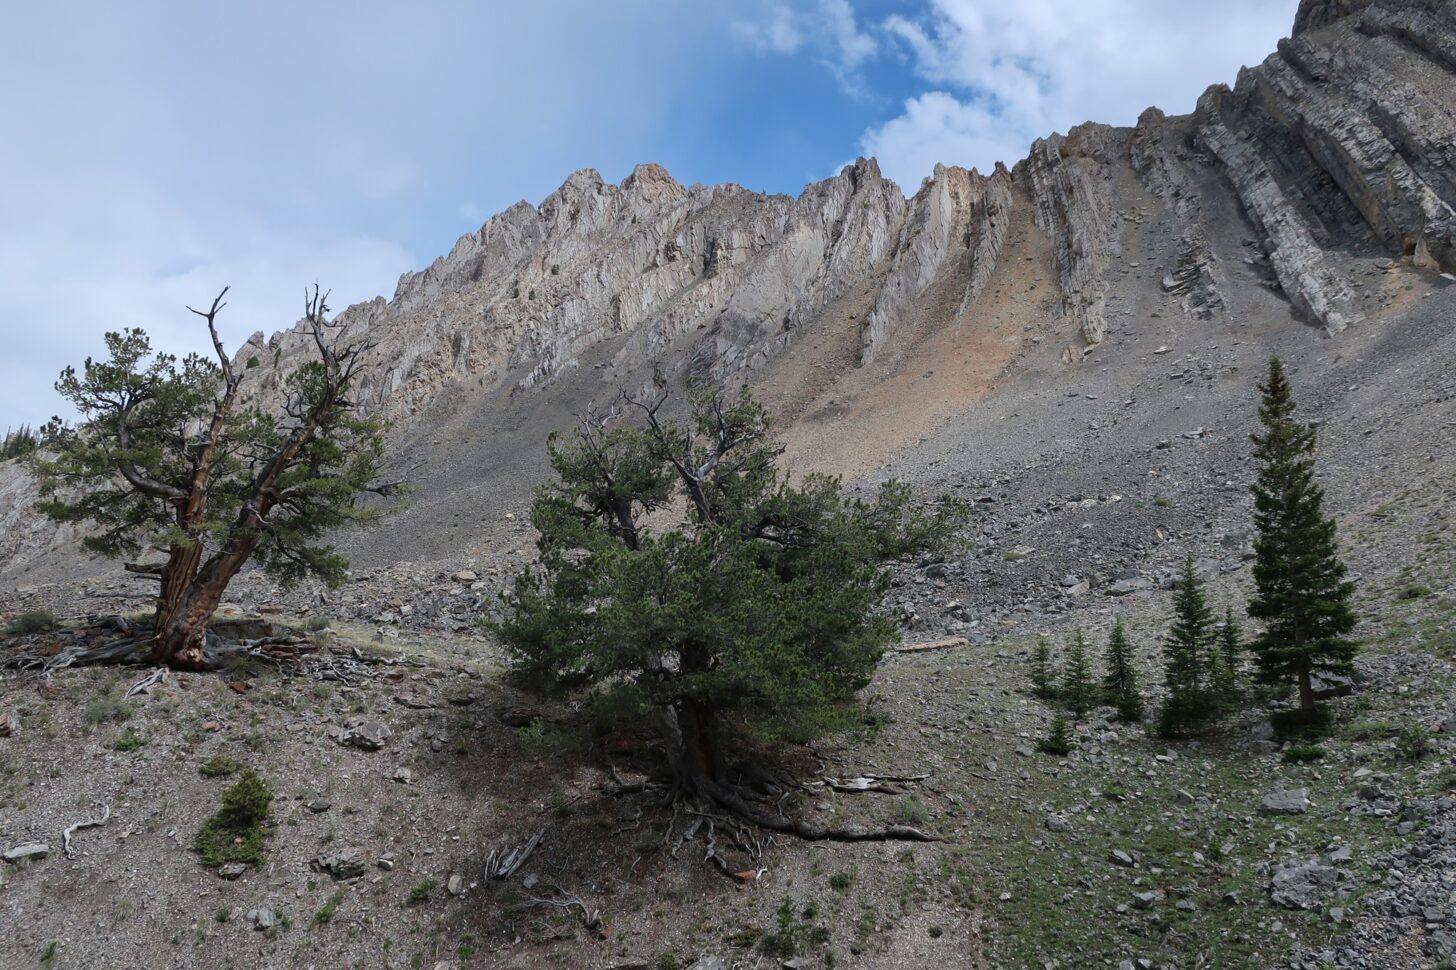 Several trees are in the foreground with rocky terrain in the background